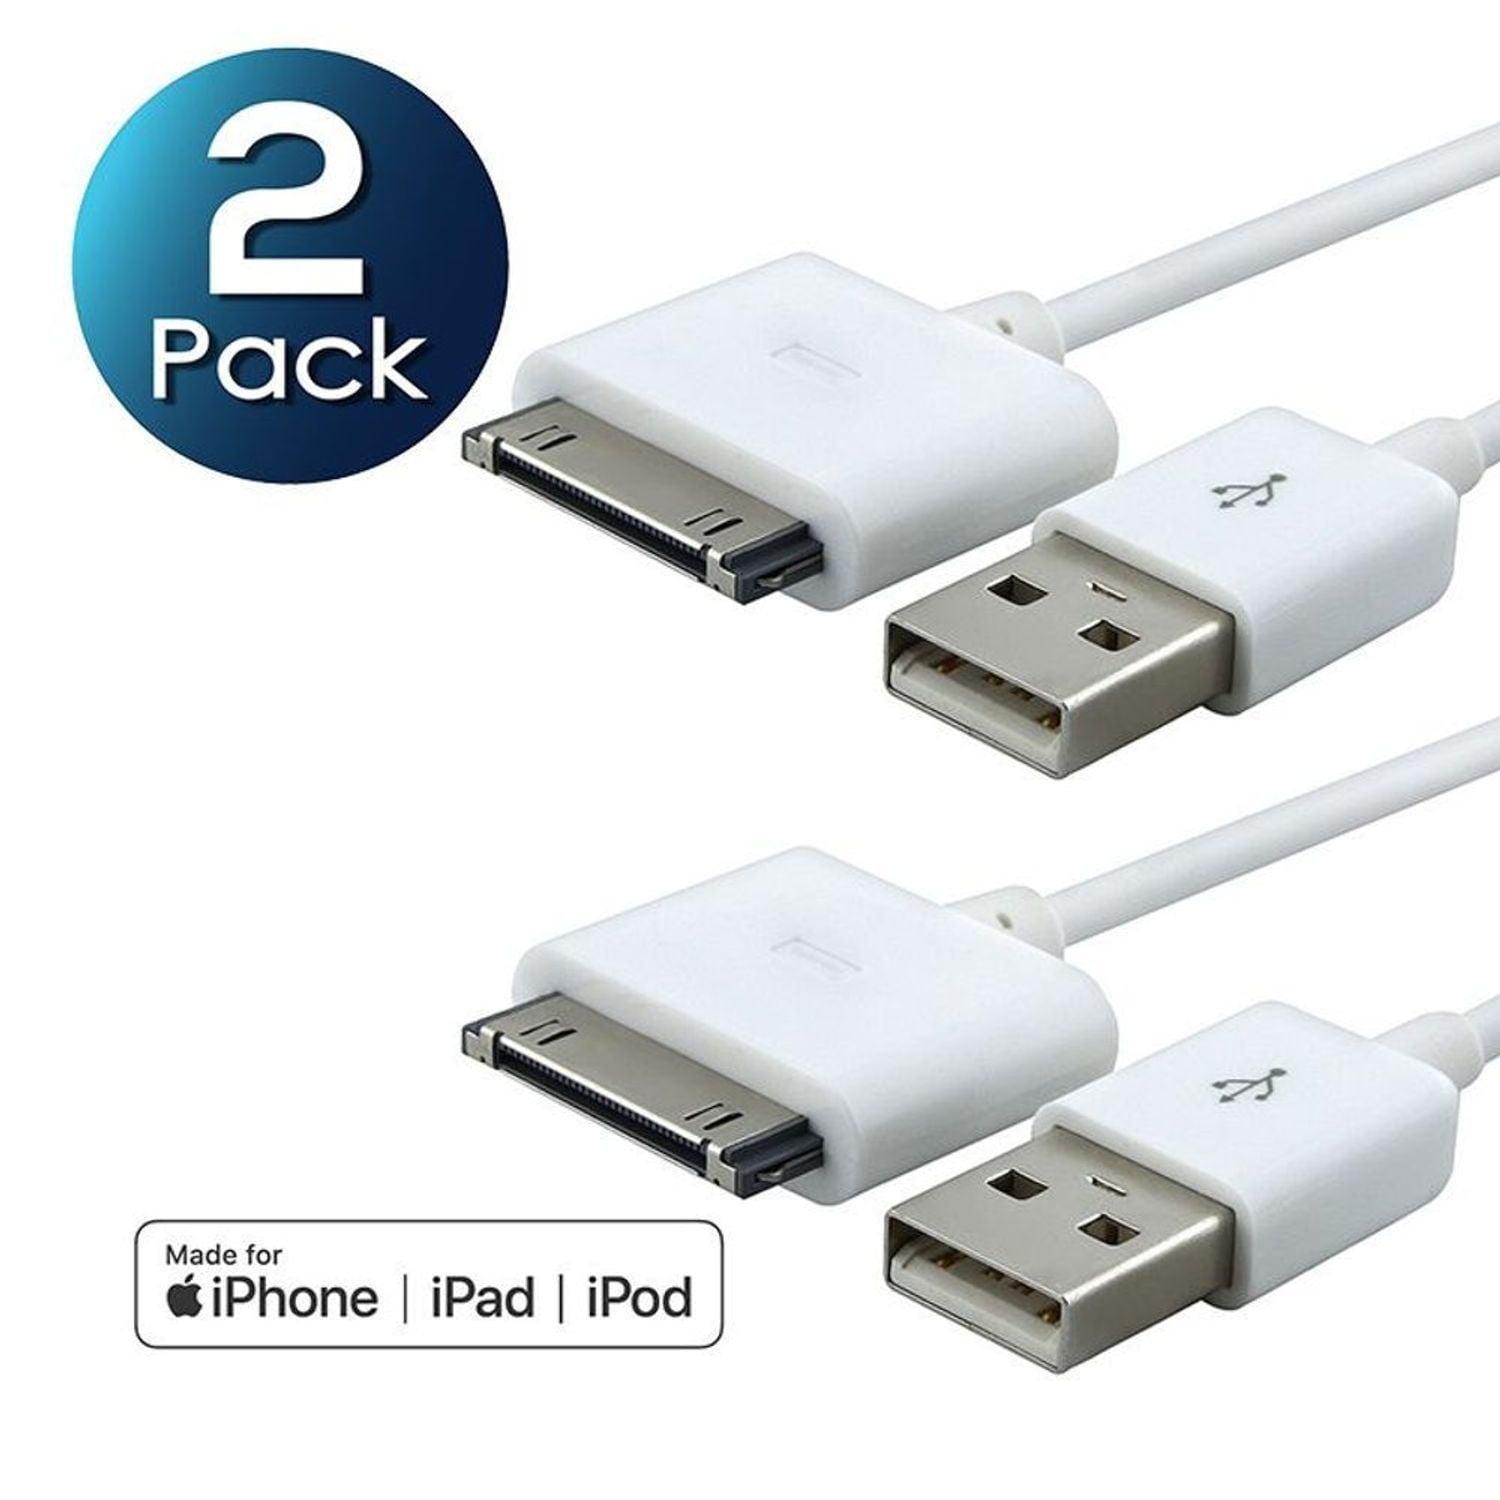 Carwires 30-PIN USB Sync Charging Cable Cord Replacement for Old Apple iPhone 4/4S 3G/3GS iPod Nano/iPod Touch iPad 1/2/3 4 ft. 